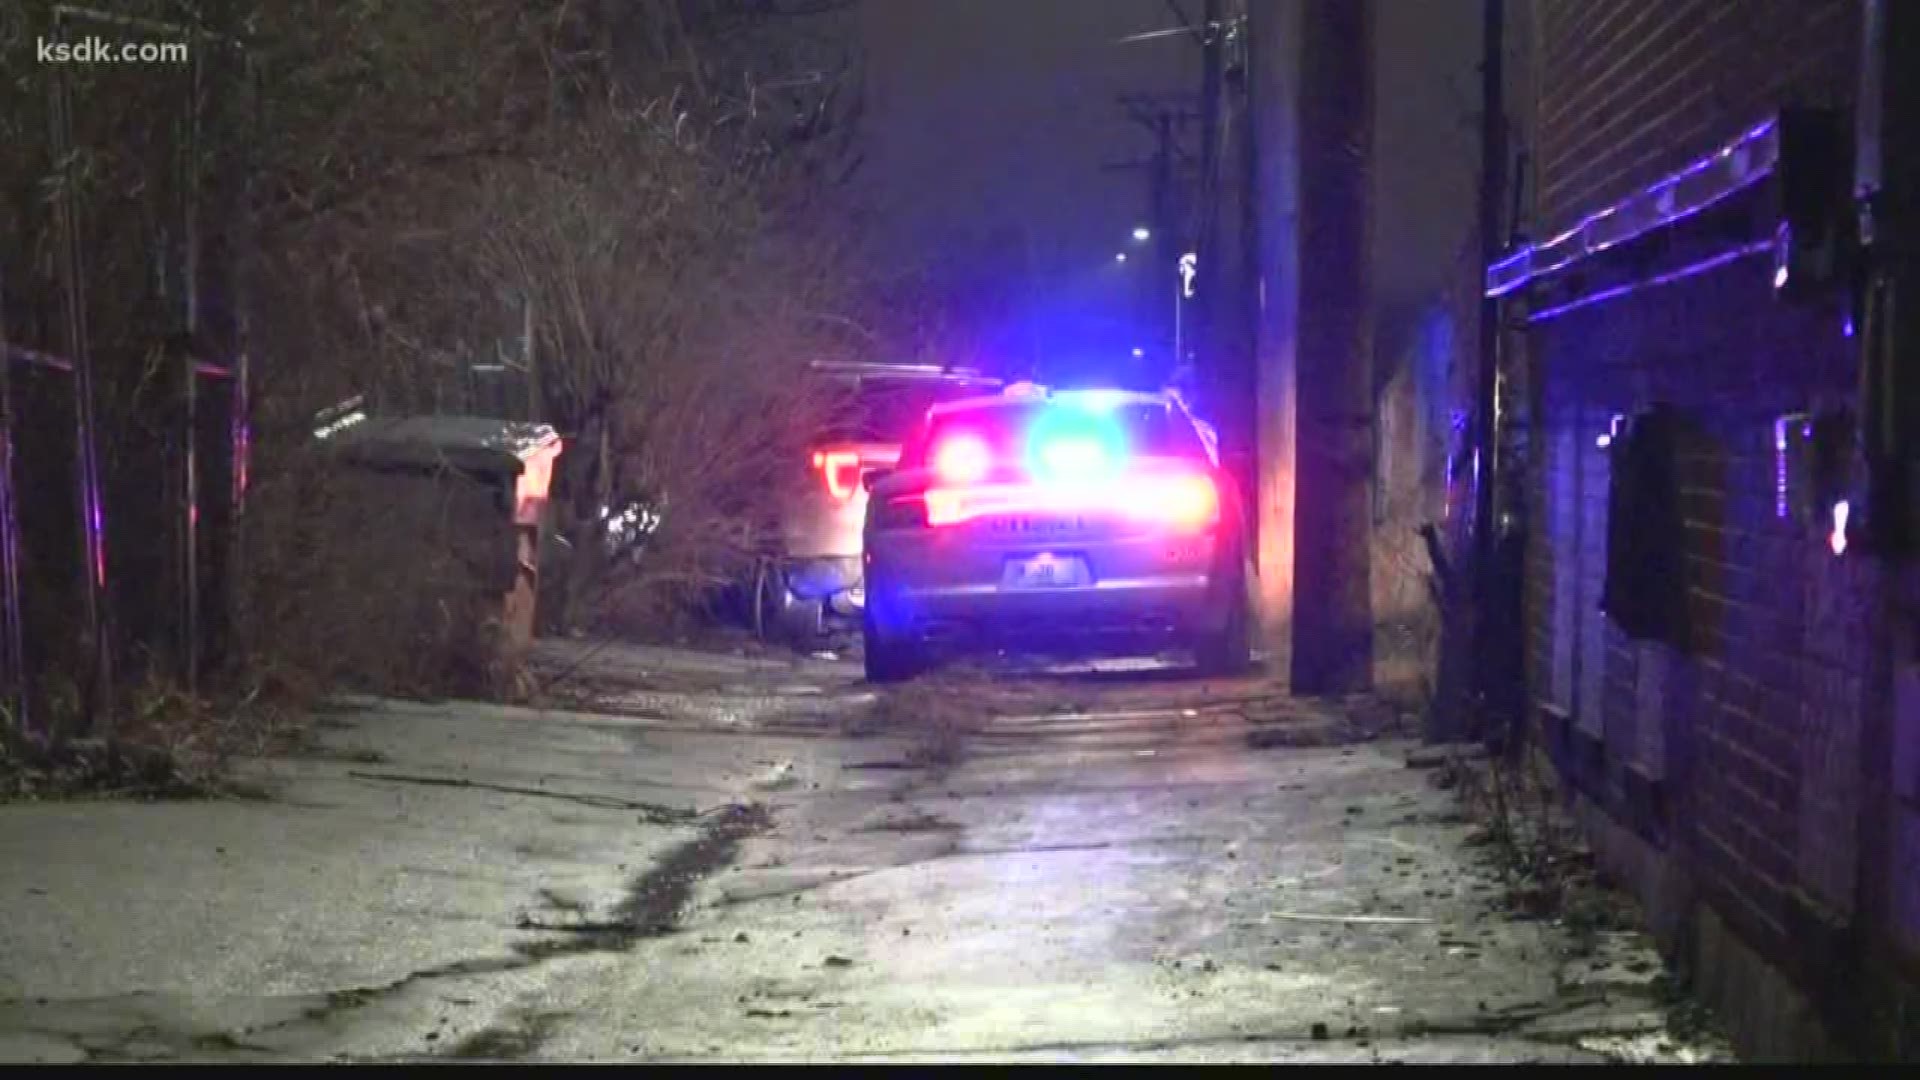 The chase ended after the stolen car was disabled in the Jeff-Vander-Lou neighborhood